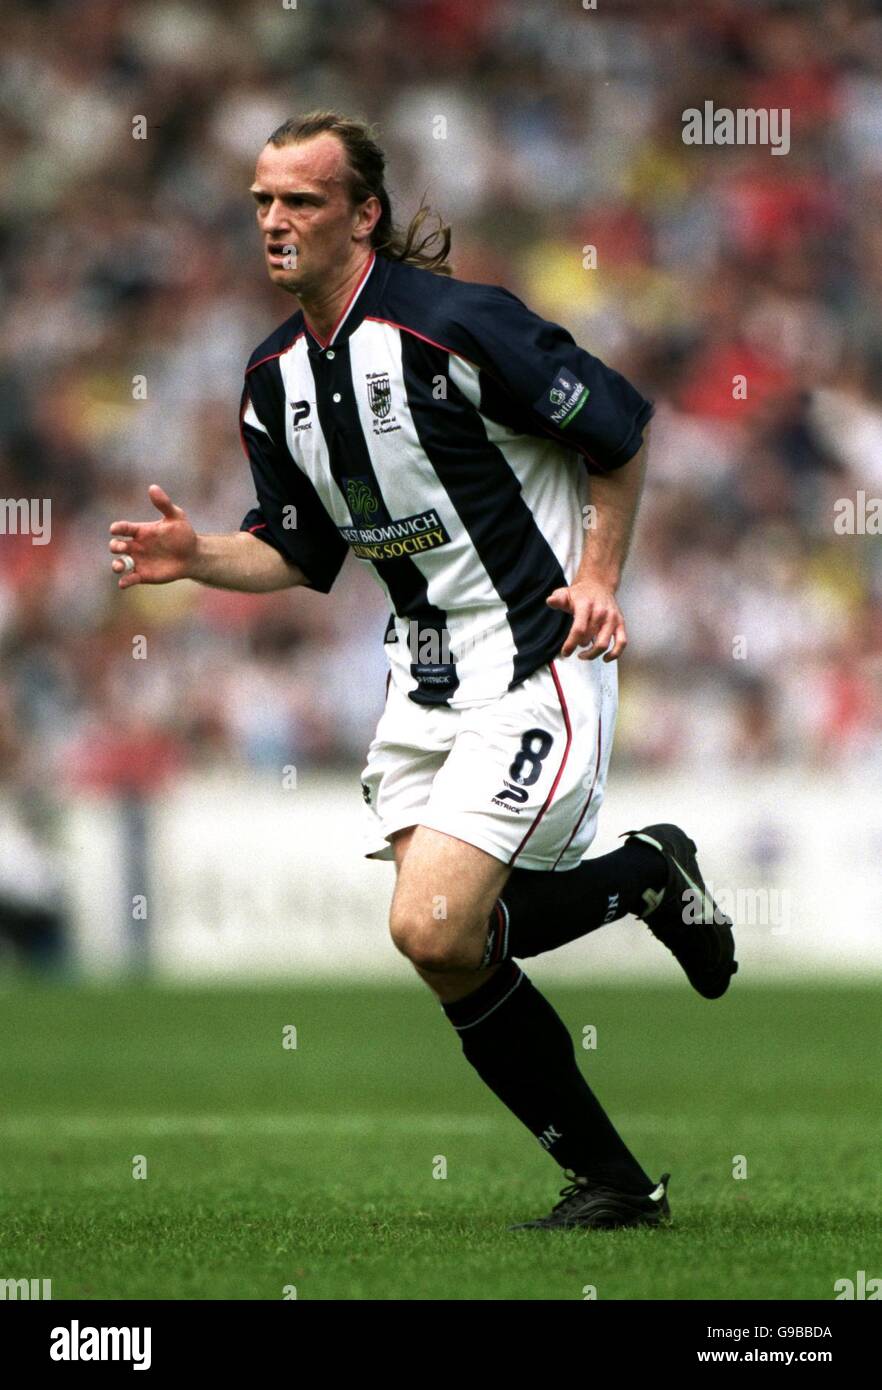 Soccer - Nationwide League Division One - West Bromwich Albion v Charlton Athletic. Richard Sneekes, West Bromwich Albion Stock Photo